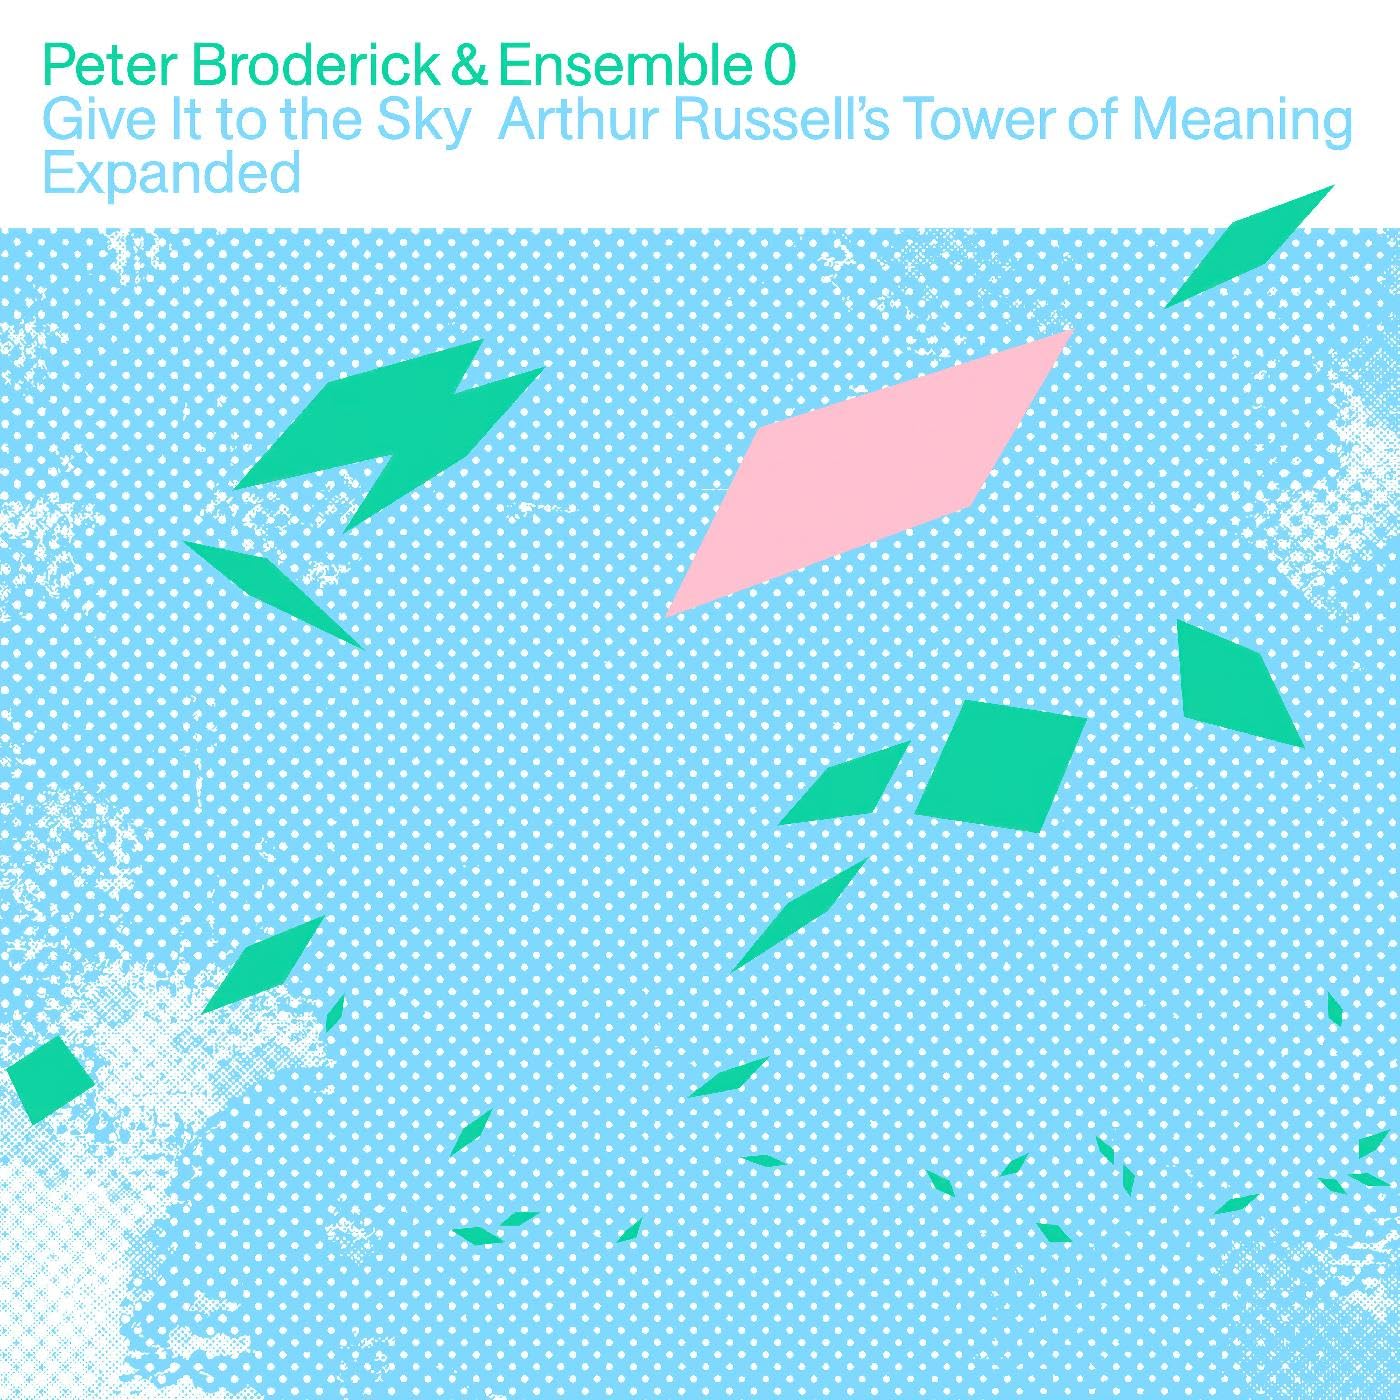 Vinile Peter Broderick & Ensemble 0 - Give It To The Sky: Arthur Russells Tower Of Meaning Expanded NUOVO SIGILLATO, EDIZIONE DEL 04/09/2023 SUBITO DISPONIBILE